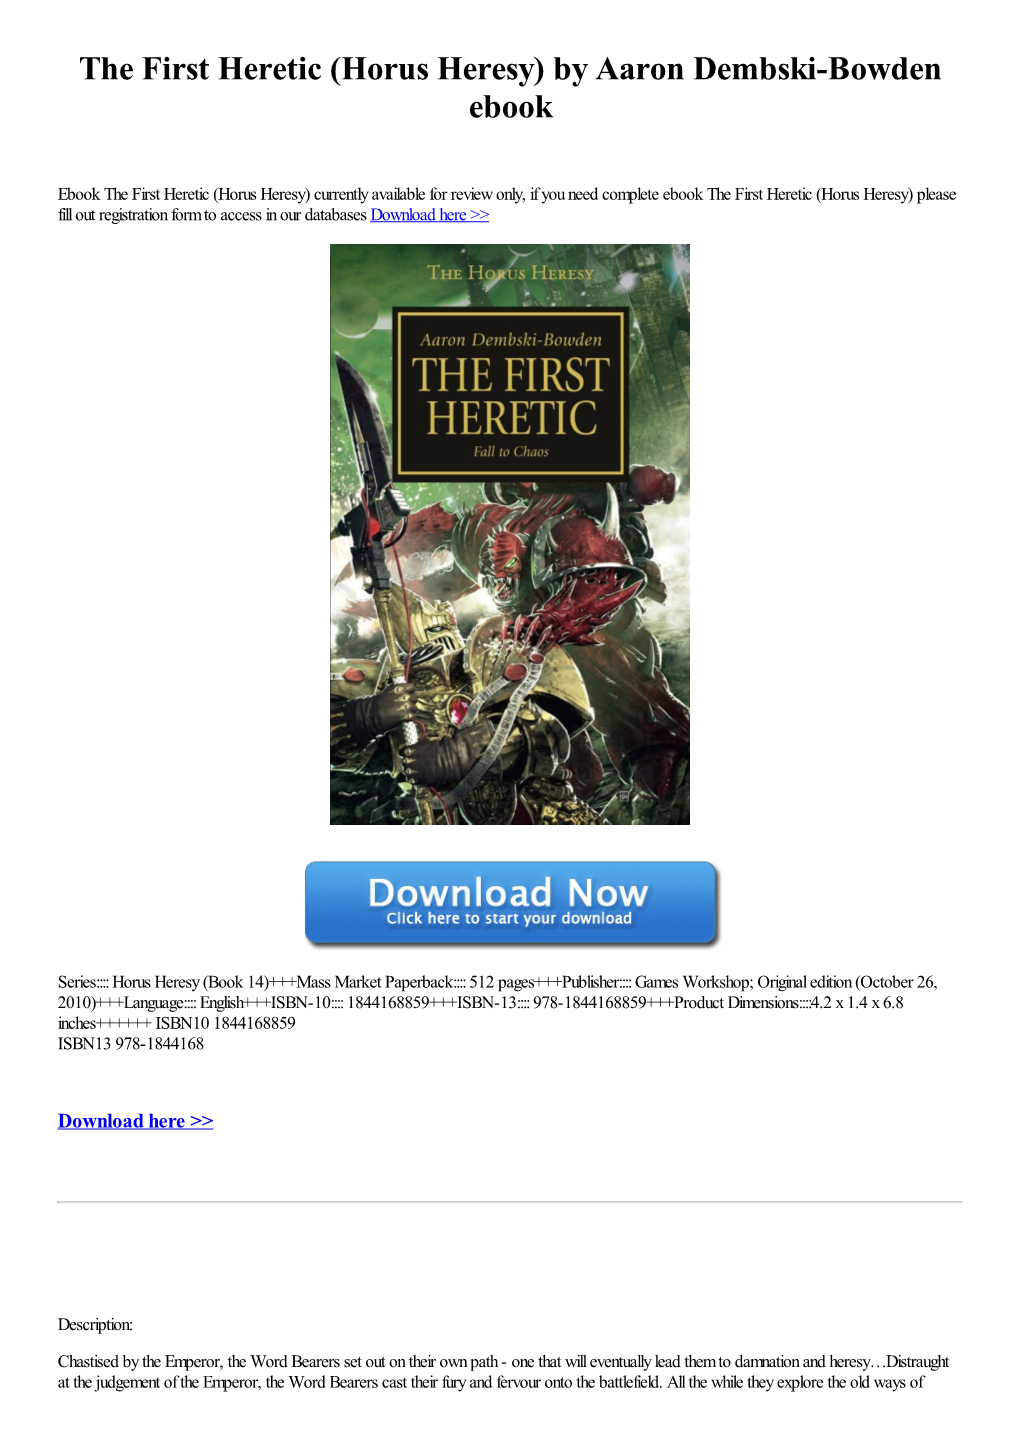 The First Heretic (Horus Heresy) by Aaron Dembski-Bowden Ebook